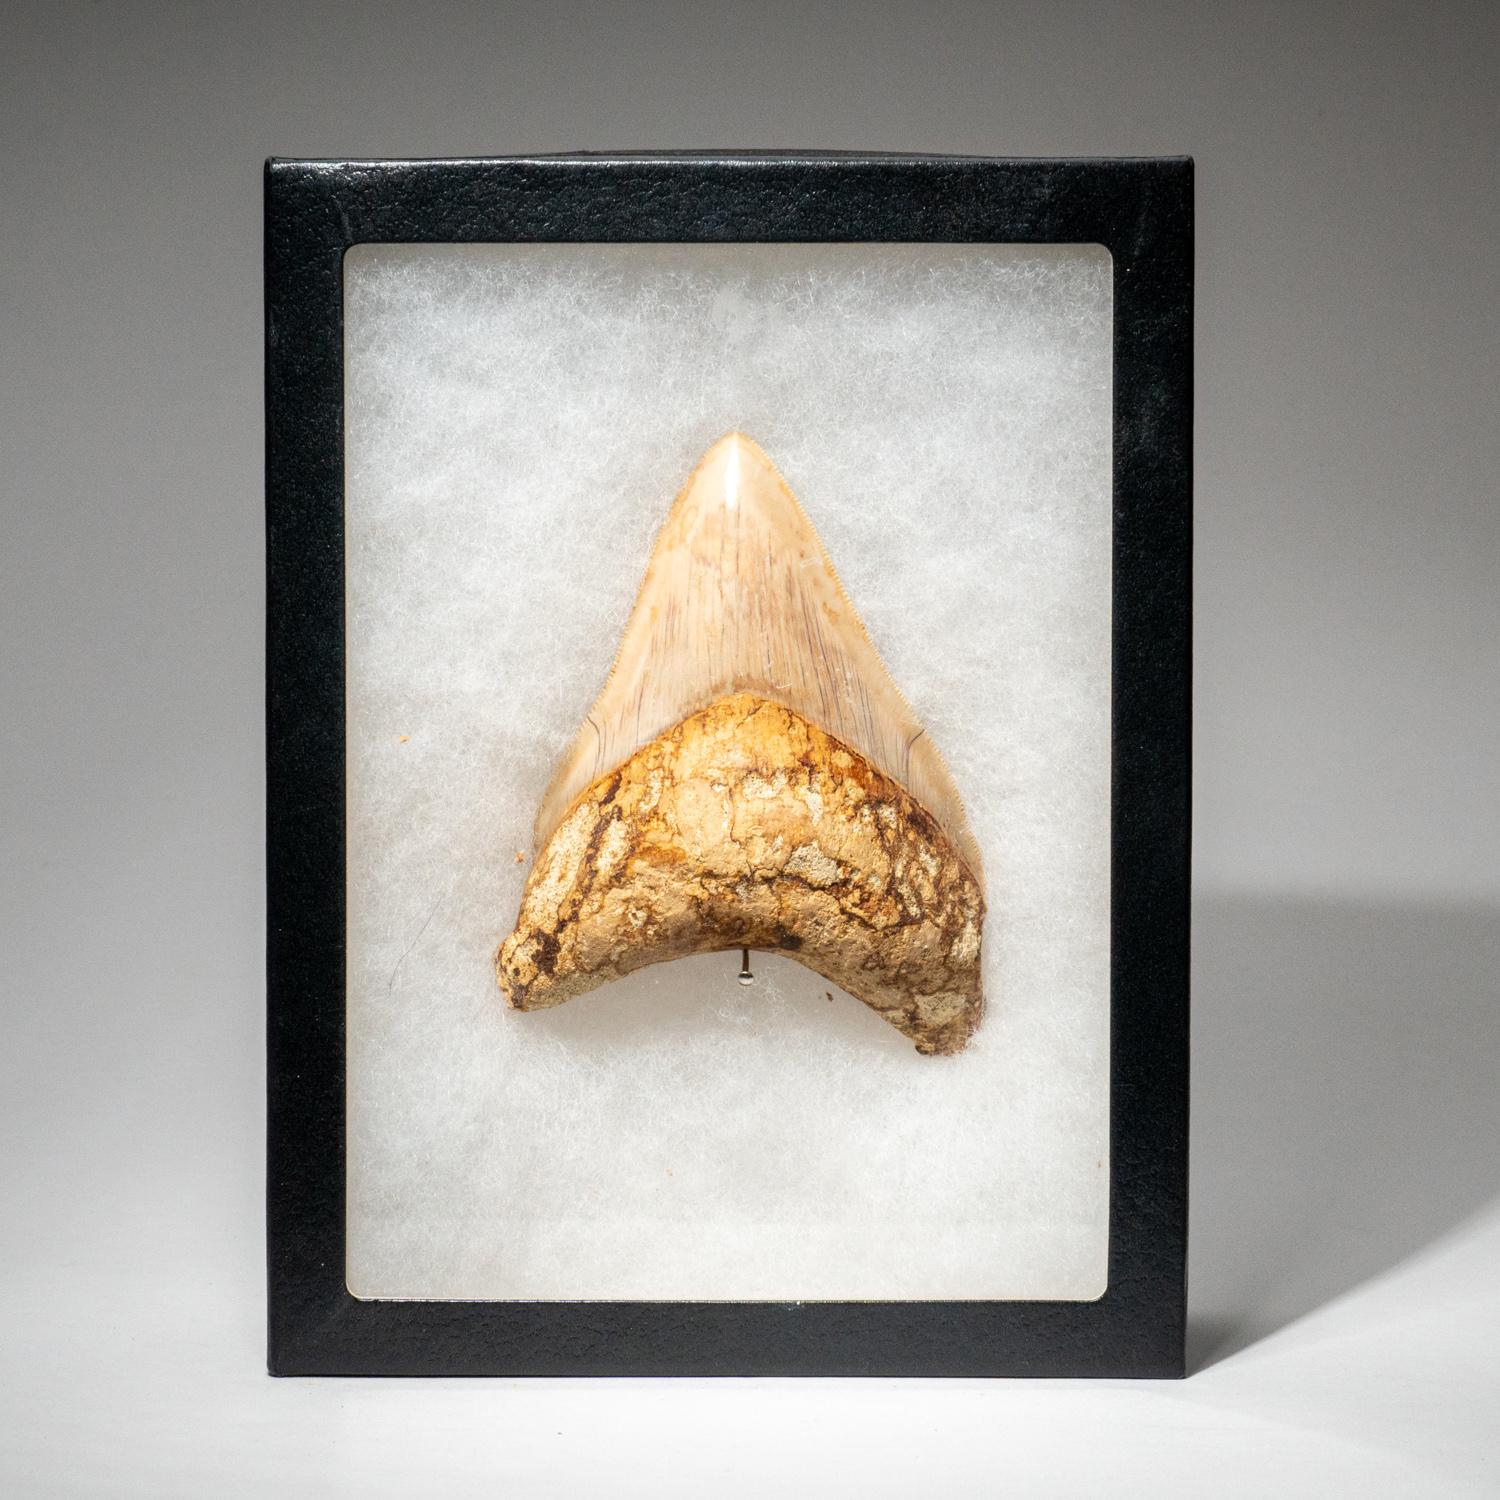 Contemporary Large Genuine Megalodon Shark Tooth from Indonesia in Display Box (190 grams) For Sale